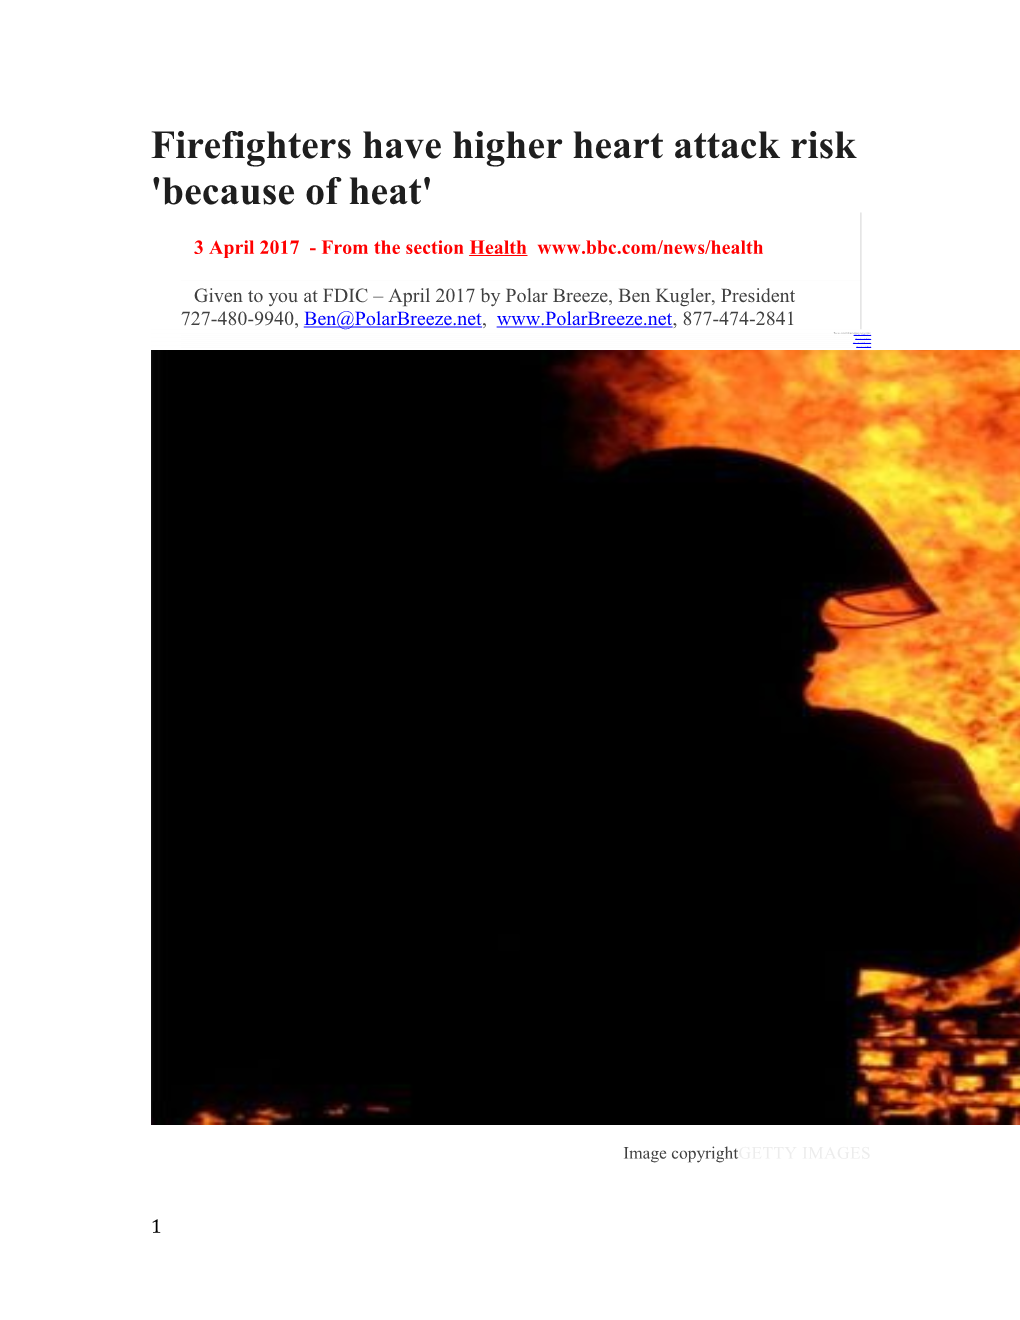 Firefighters Have Higher Heart Attack Risk 'Because of Heat'